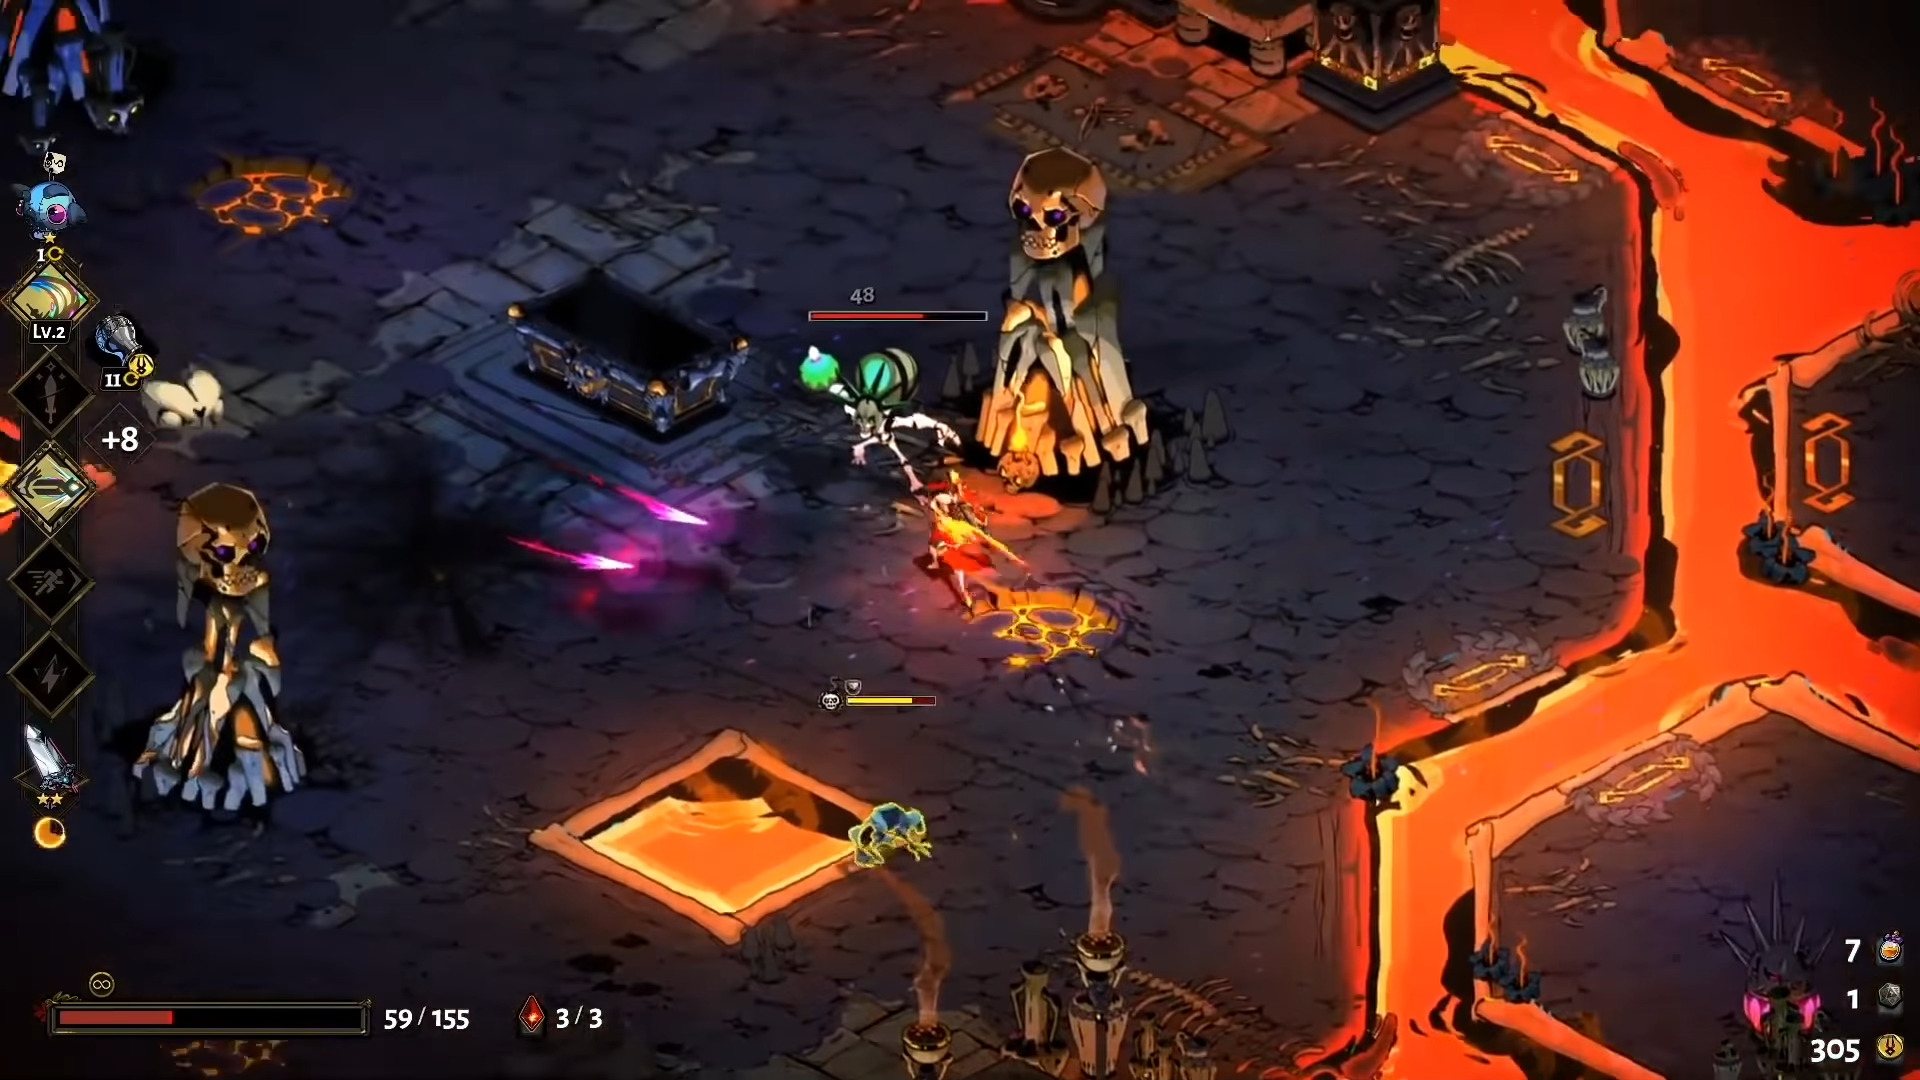 The Action Roguelike Hades Had A Spectacular Year On Steam, According To Recent Figures